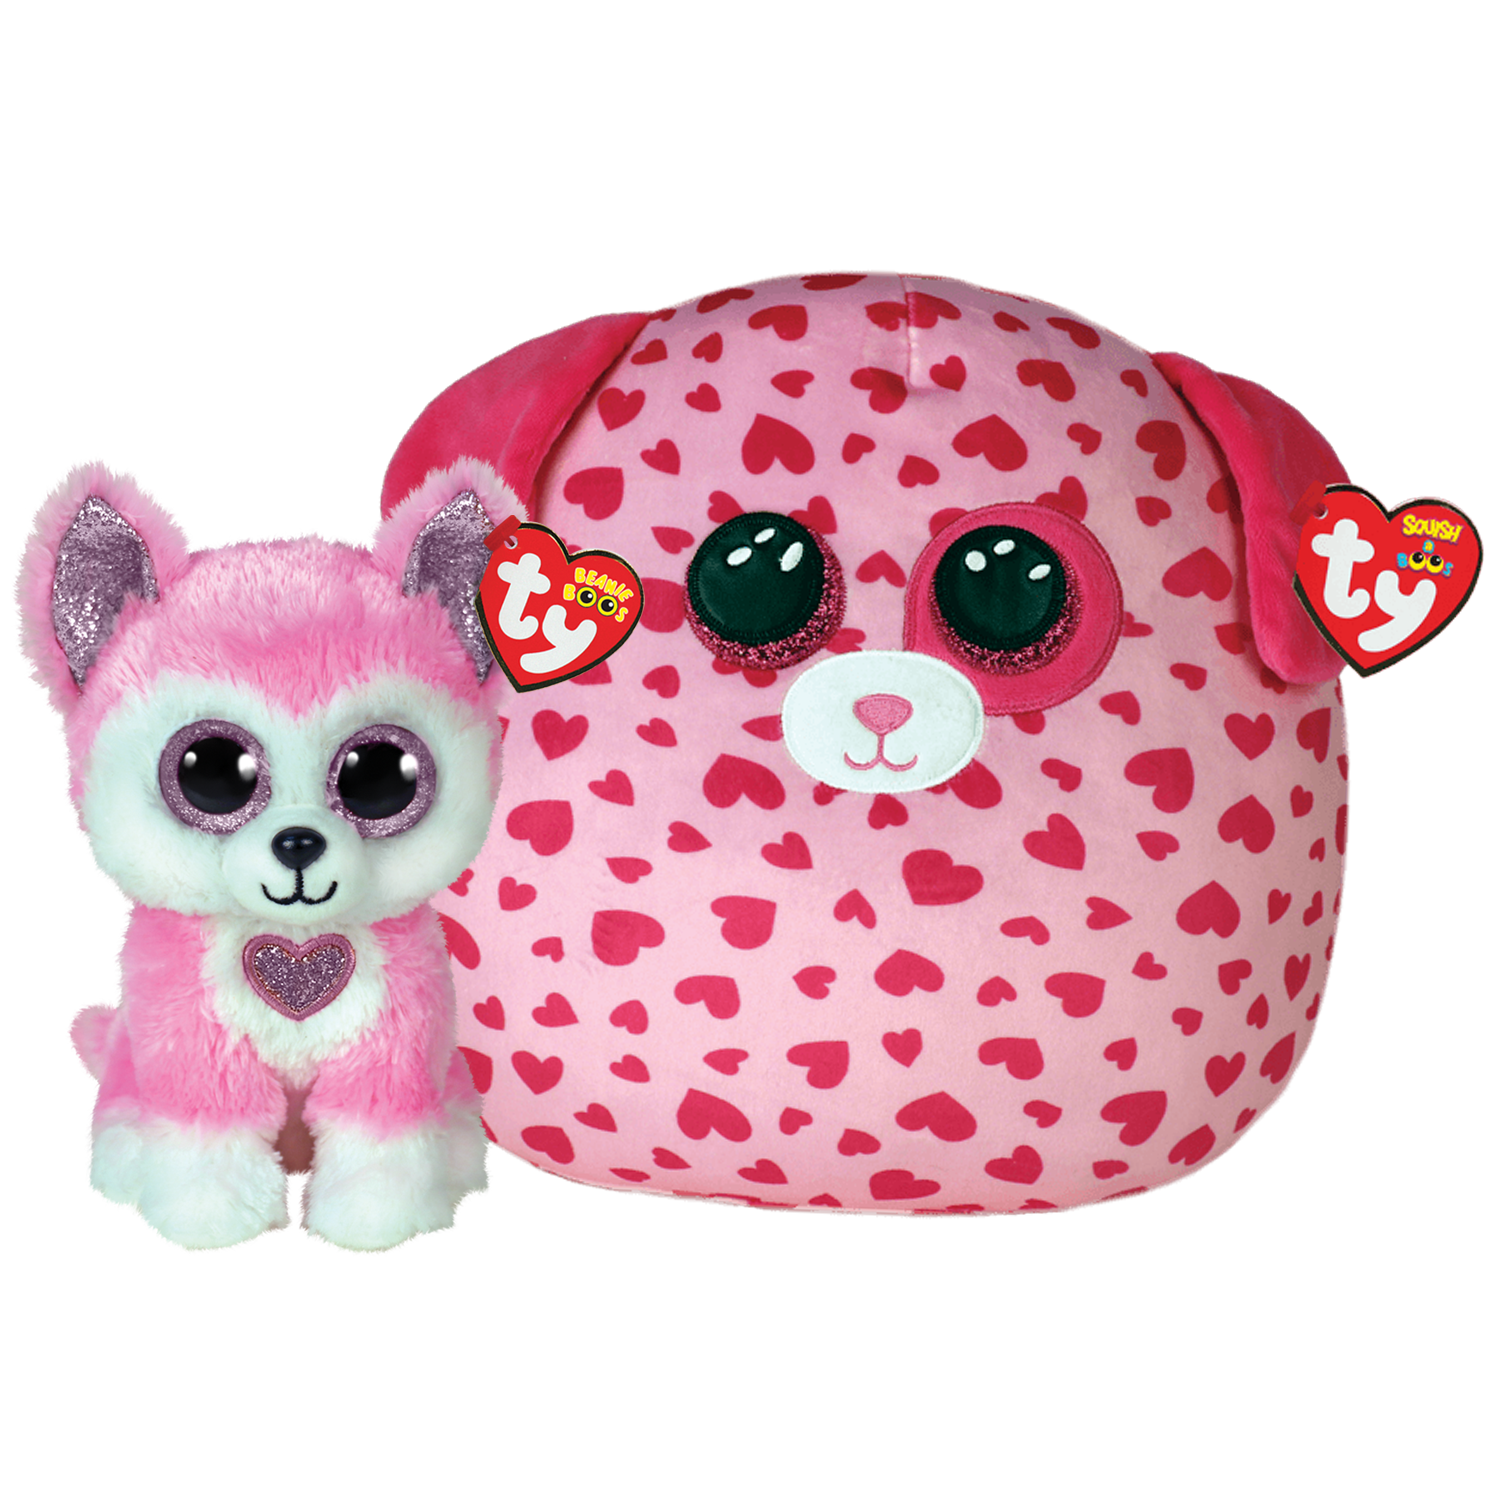 Hearts Bundle - Boo And Squish A Boo